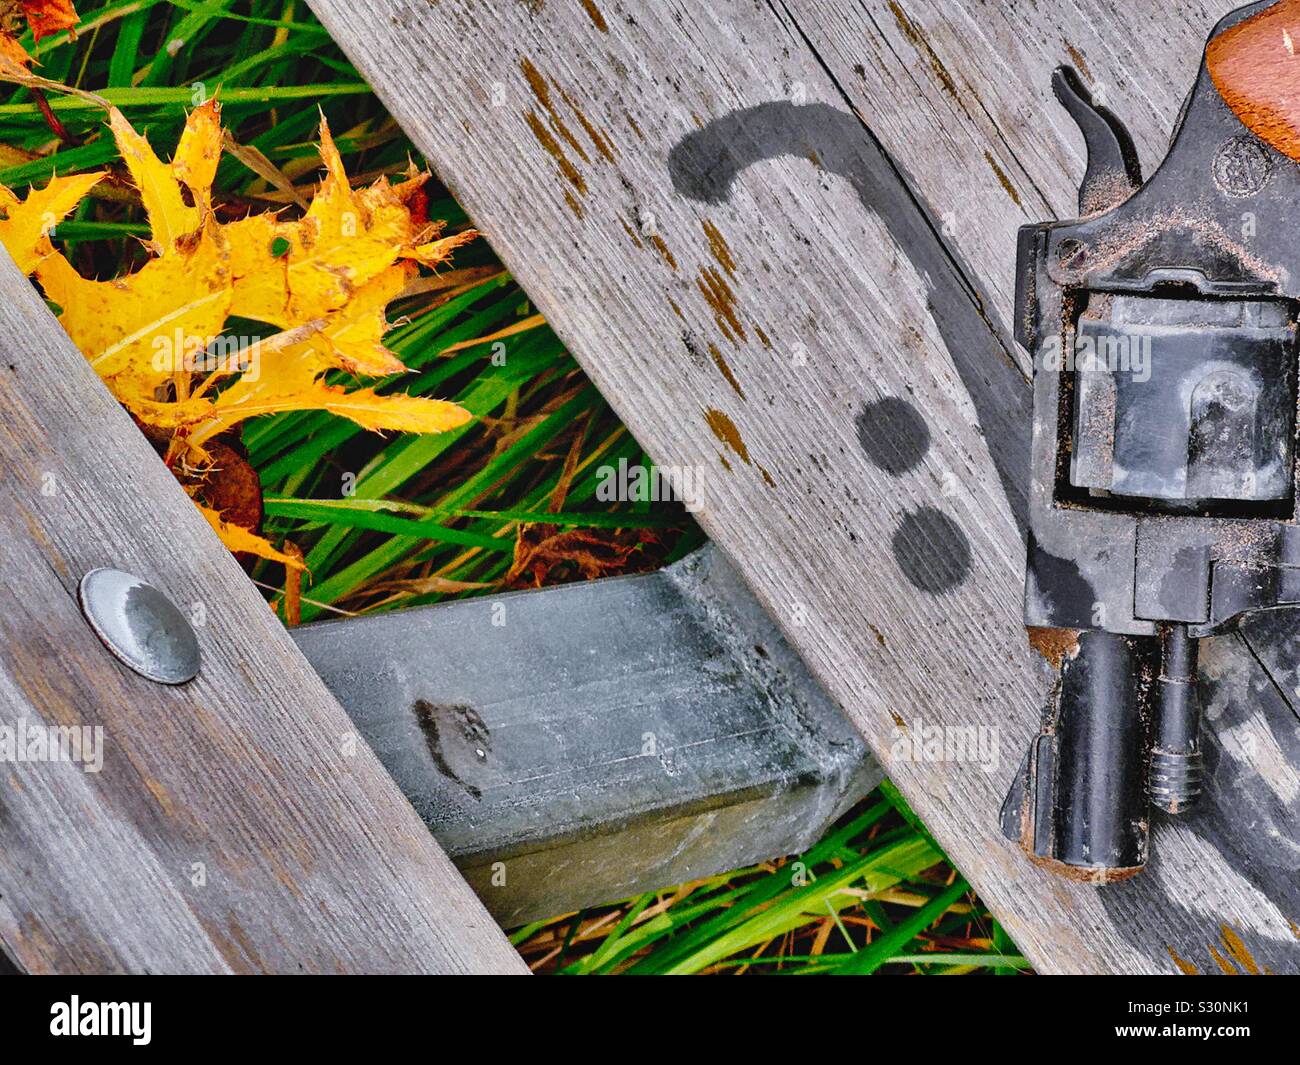 Gun abandoned discarded on outdoor seat Stock Photo